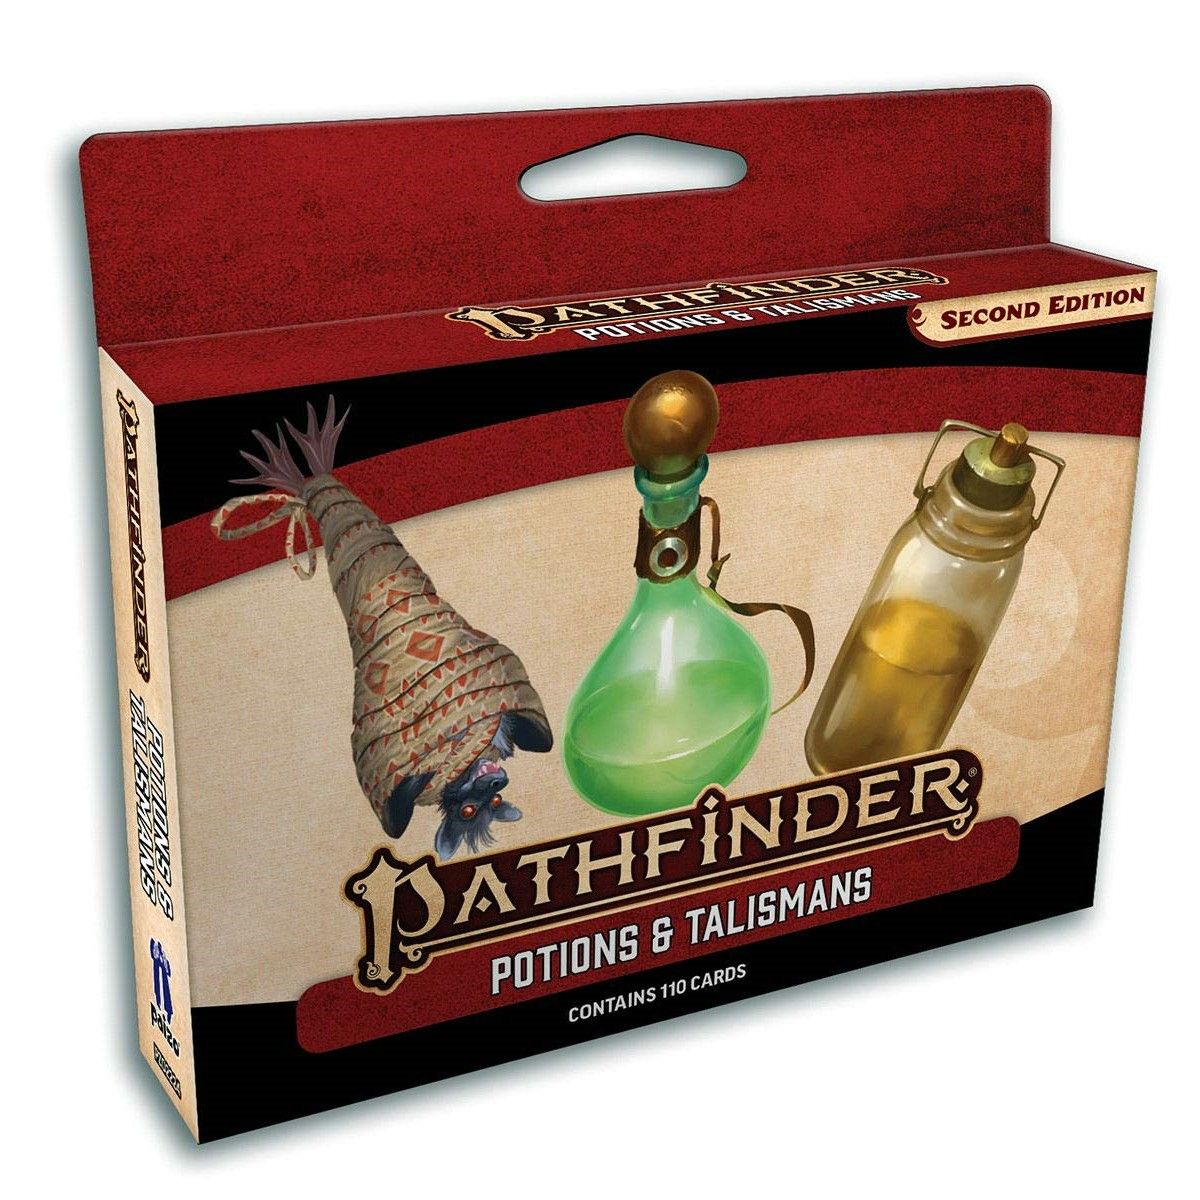 Pathfinder Second Edition Potions and Talismans Deck